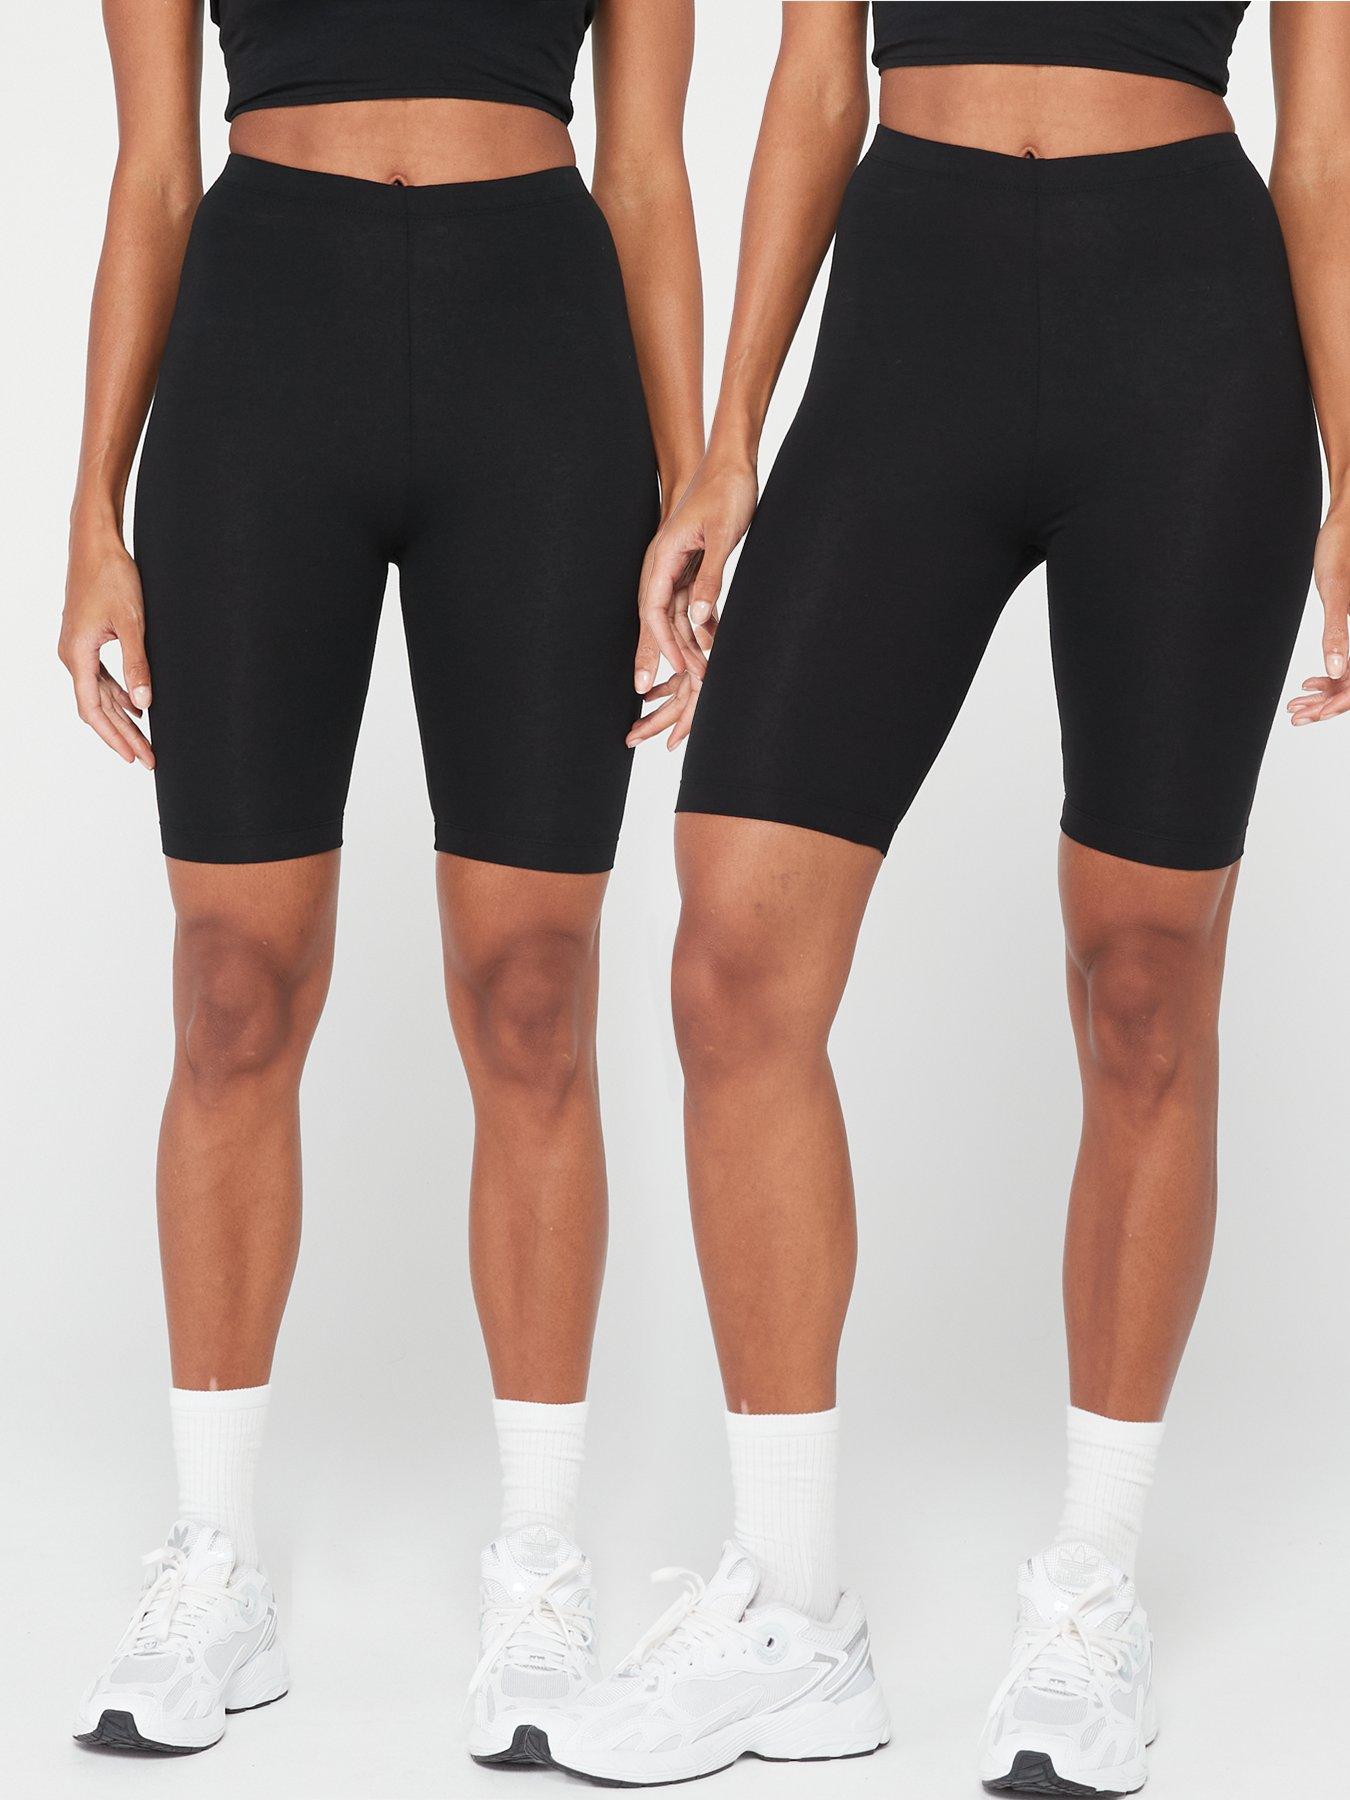 JUICY COUTURE Women's Seamless Shaping Bike Shorts 2 pack